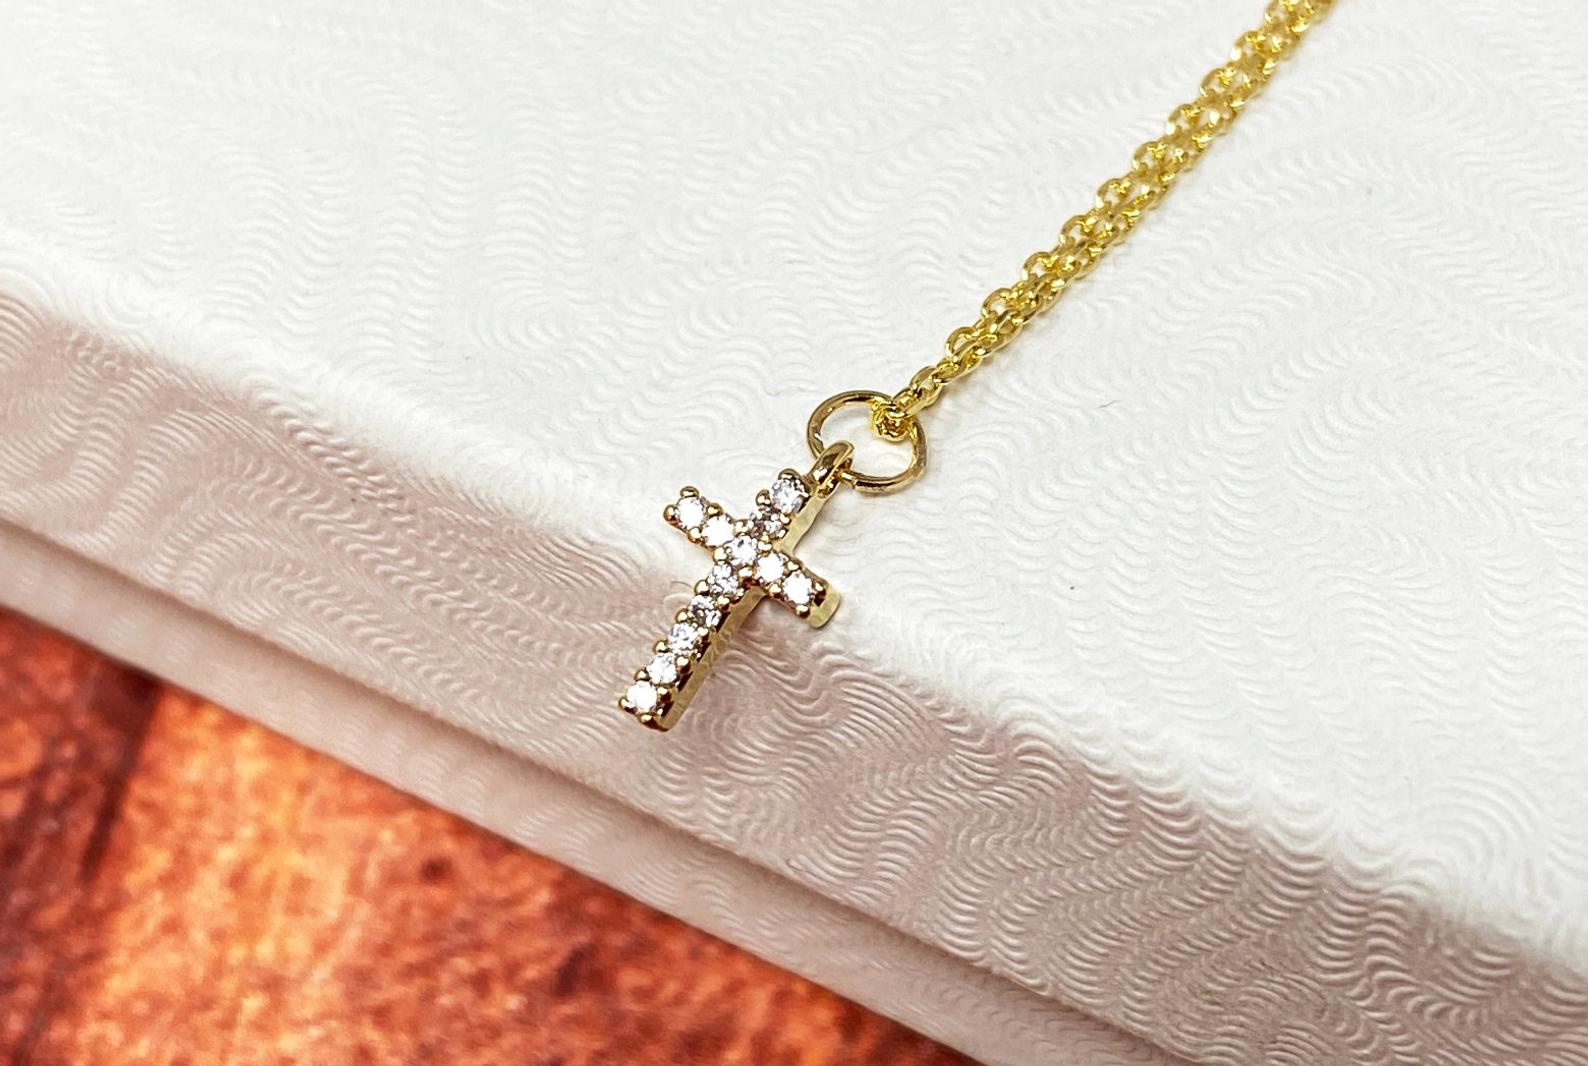 Tiny Cross Necklace/Minimal Necklace, 18k Gold/Silver Plated, Simple Tiny  Necklace for Women Girls - Walmart.com